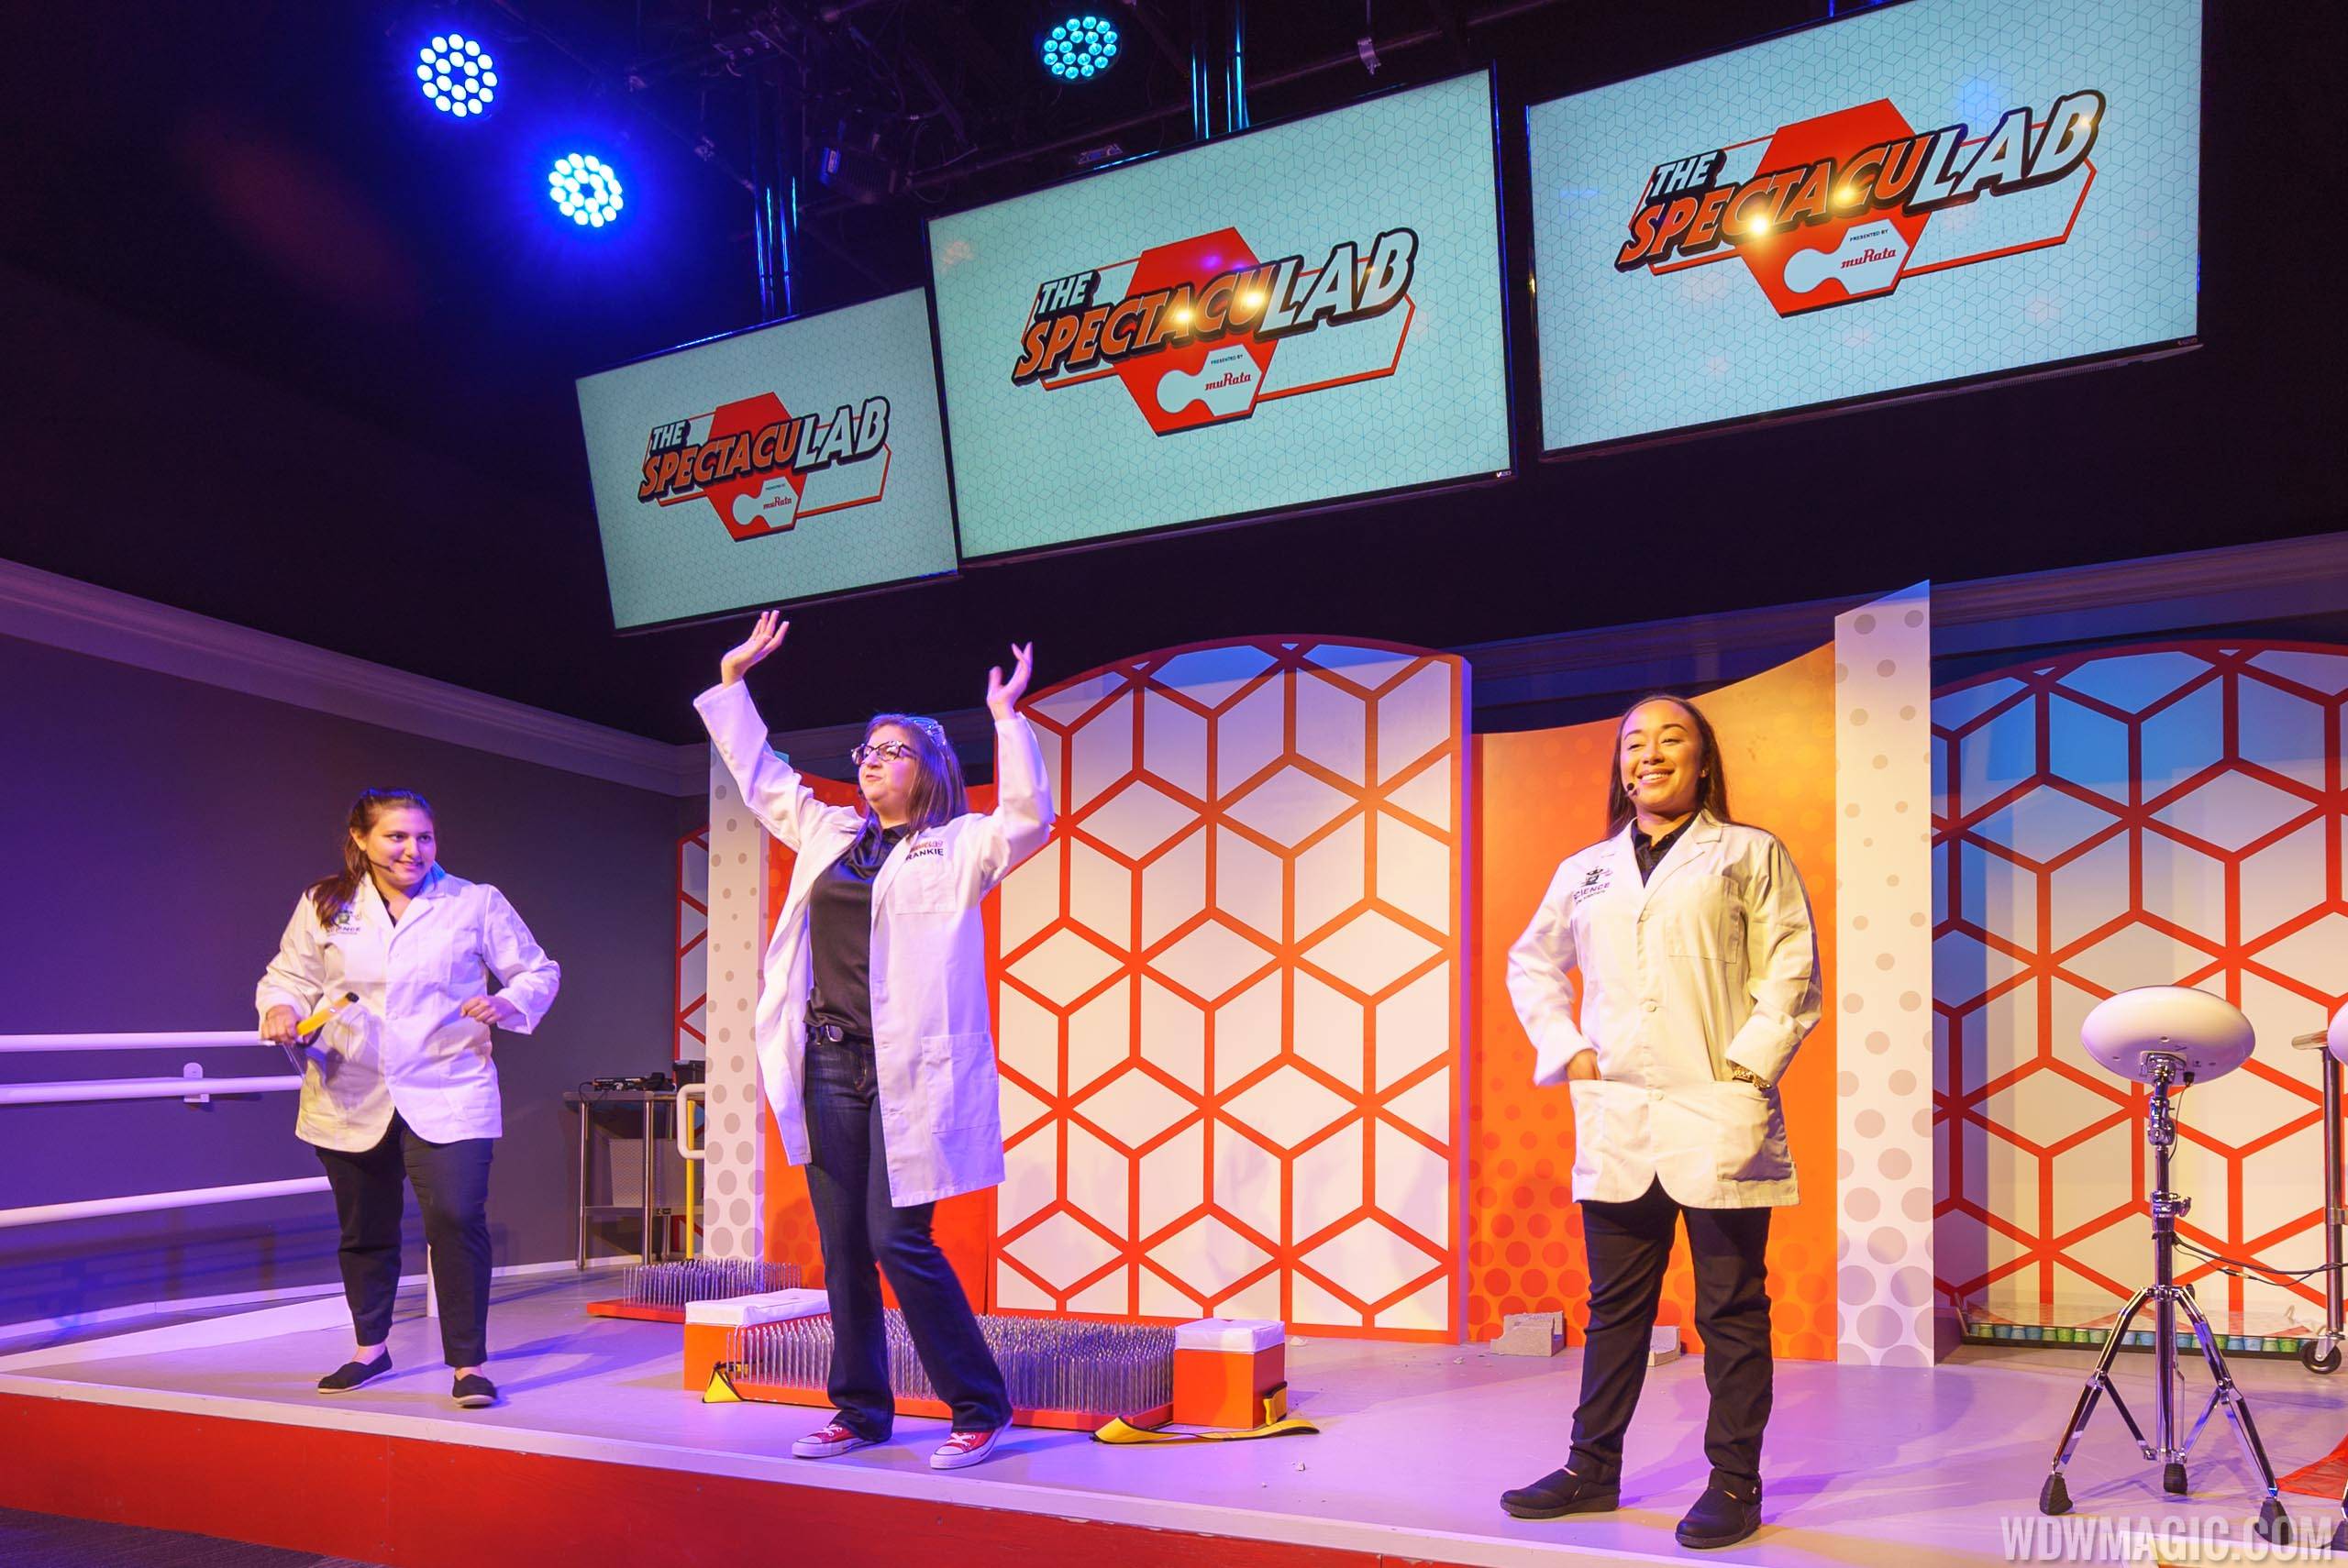 VIDEO - The SpectacuLAB now open in Epcot's Innoventions